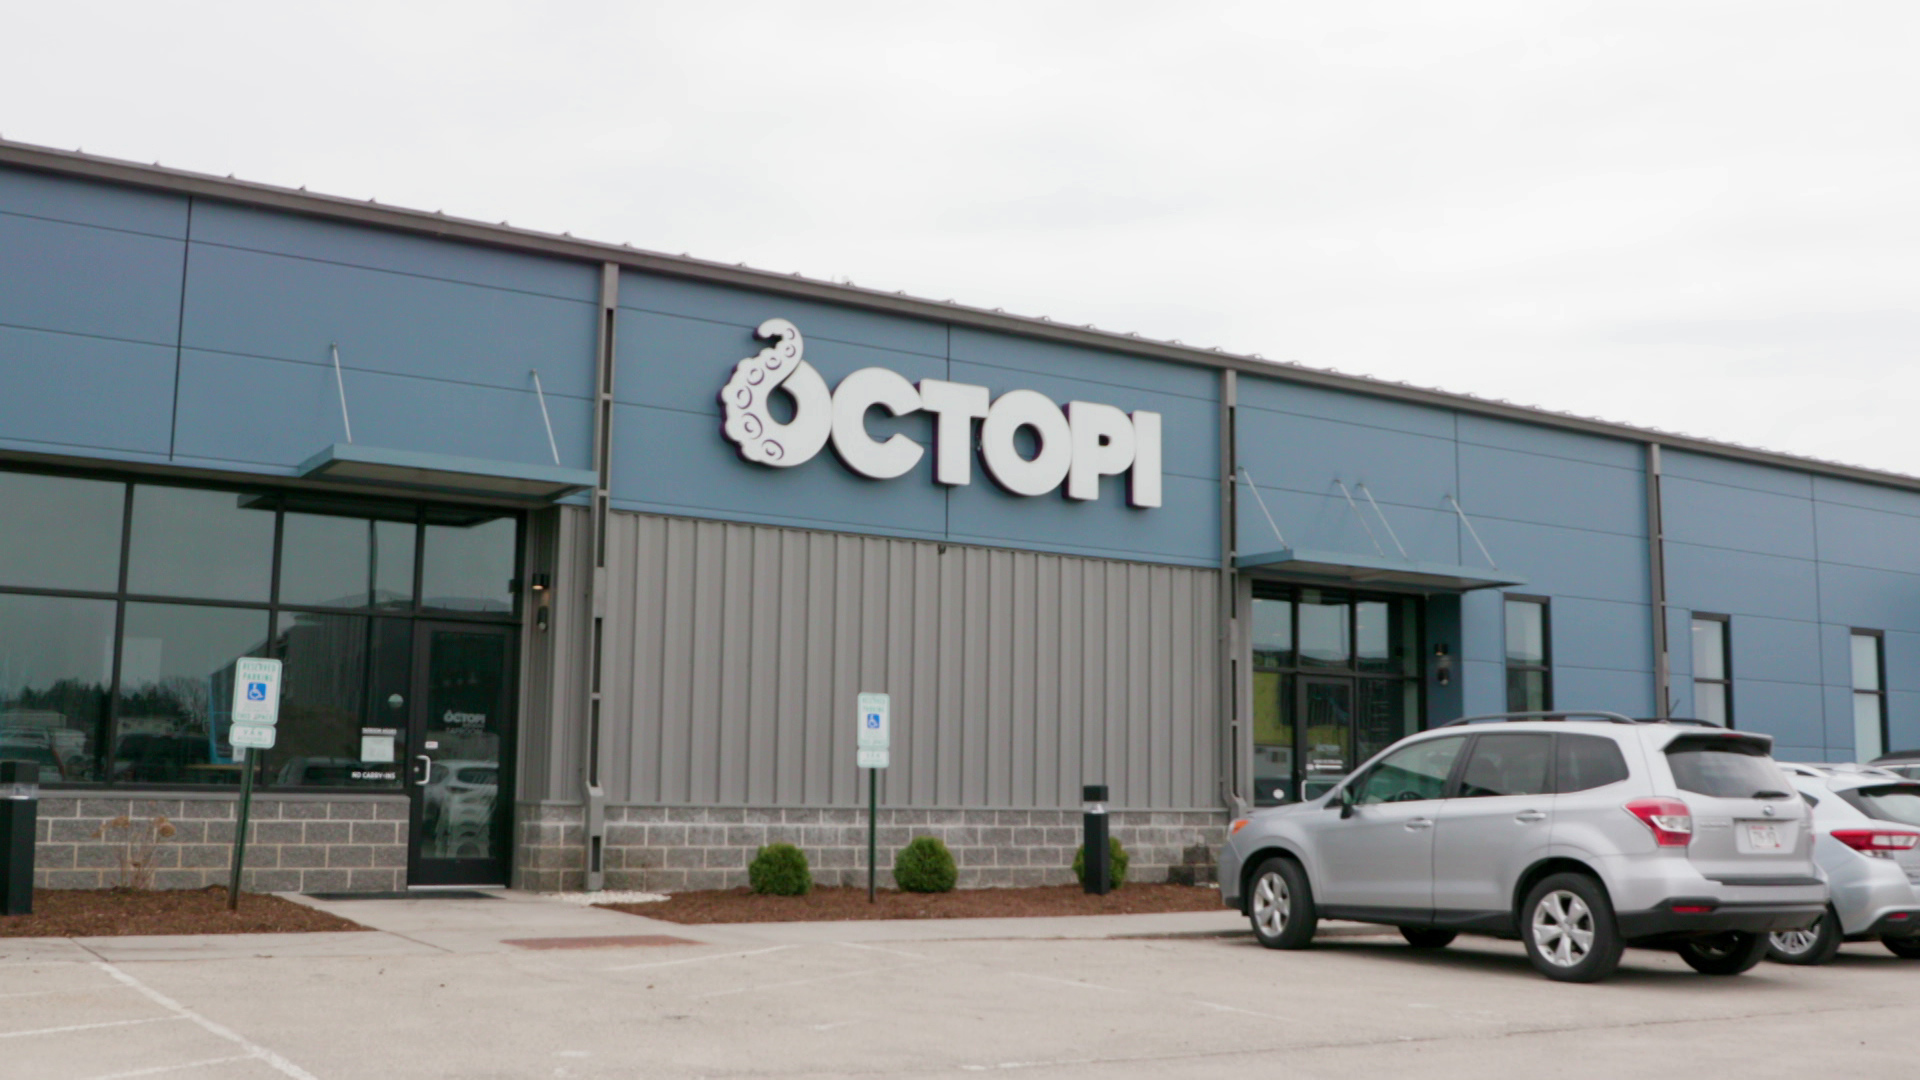 A sign that reads "Octopi" is at the front of a single-story building with blue siding around multiple windows, with cars parked in front.